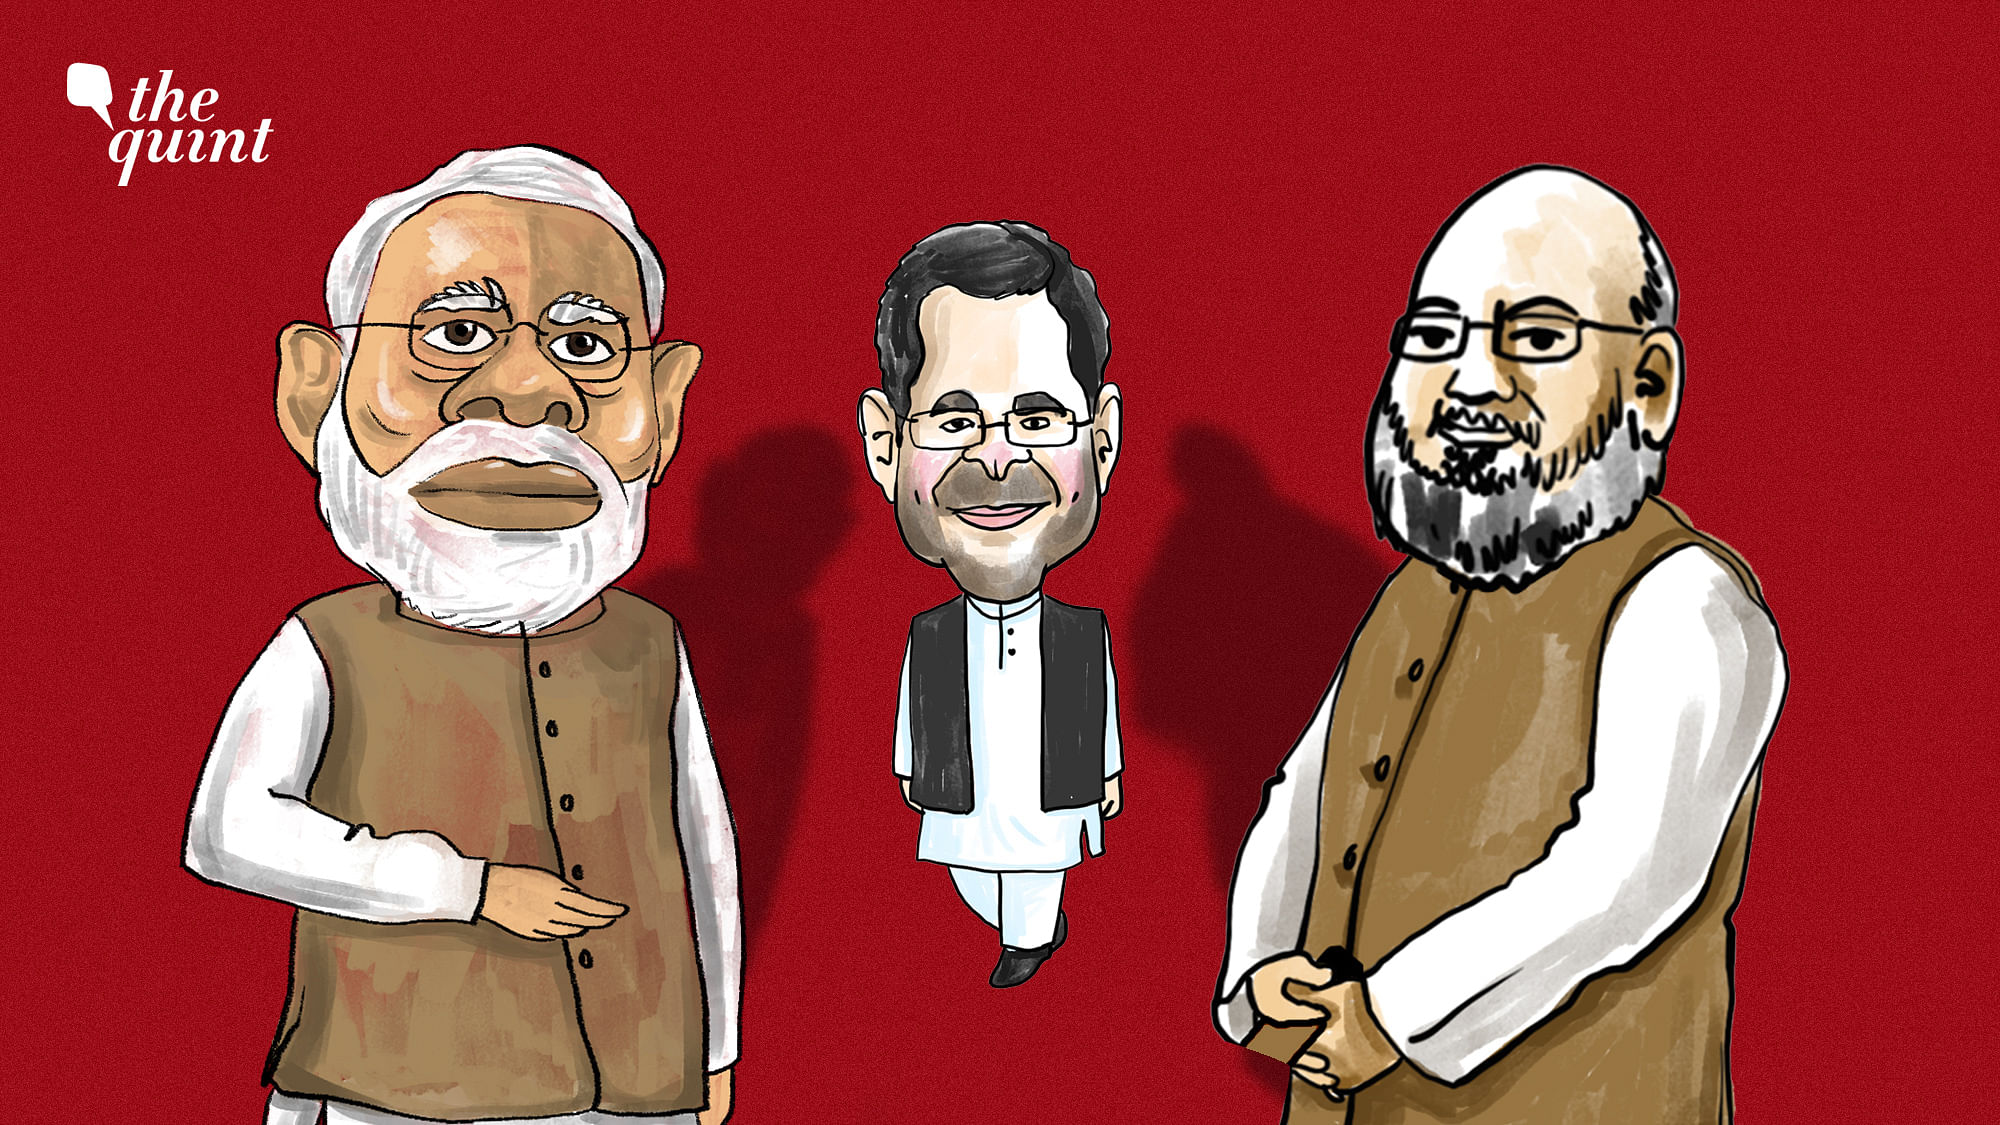 In 2019, will the Gujarat election result be seen as a turning point or a blip in the Modi juggernaut?&nbsp;